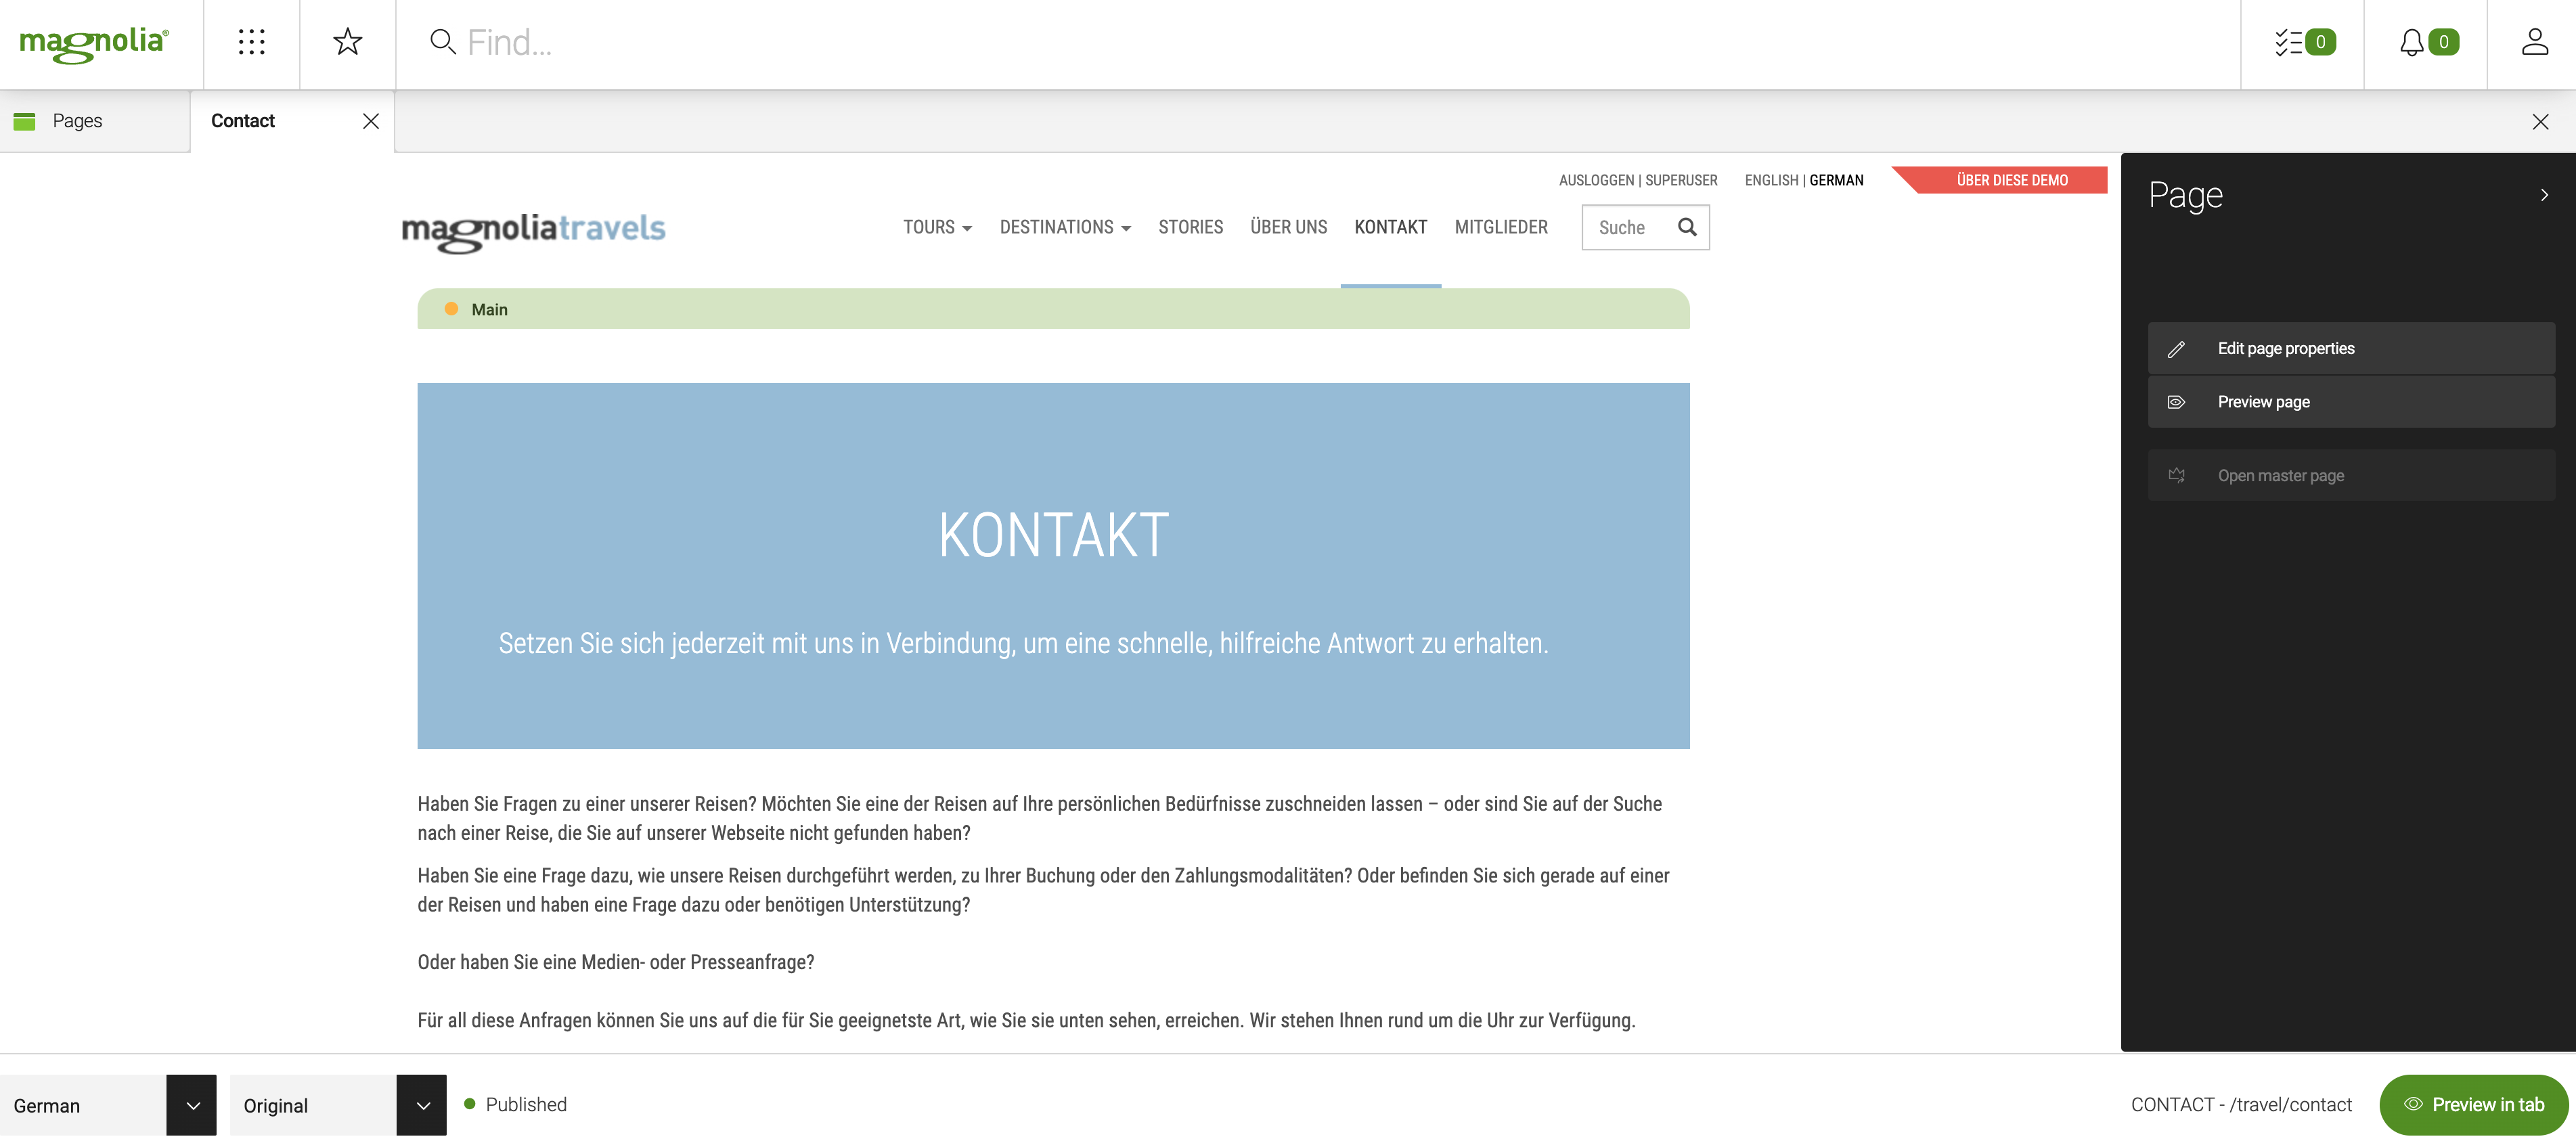 Contact page in German